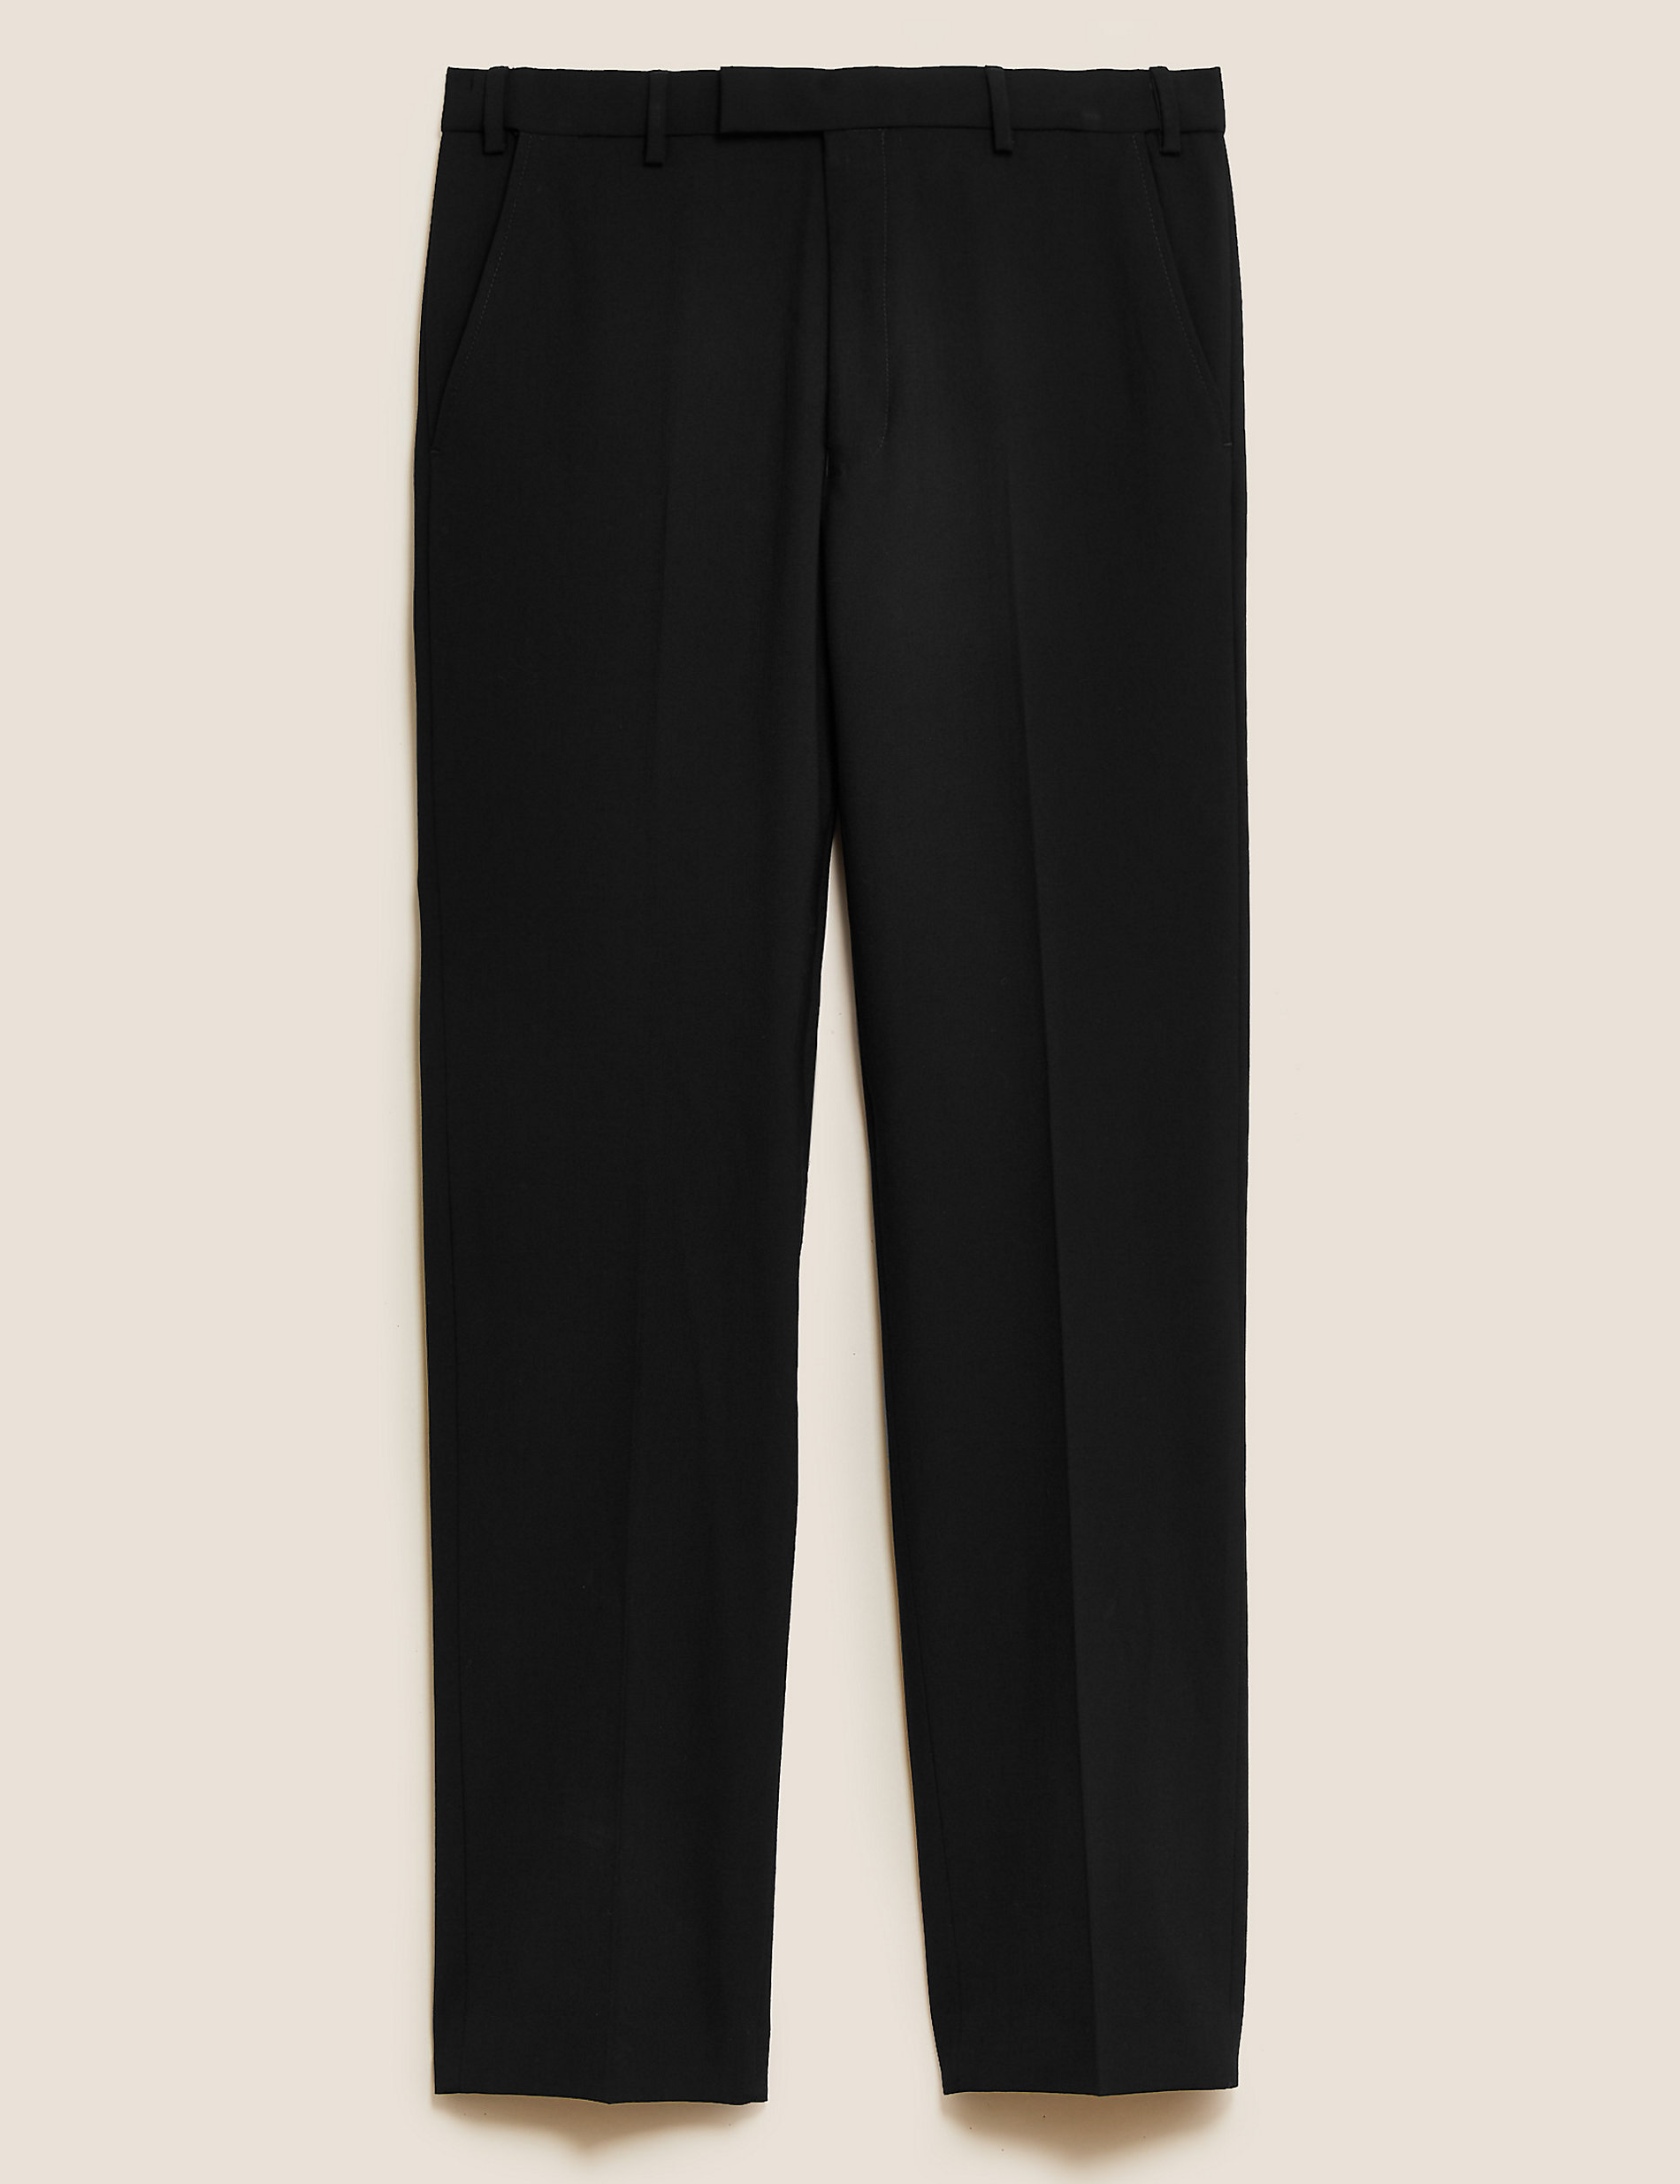 The Ultimate Black Tailored Fit Trousers